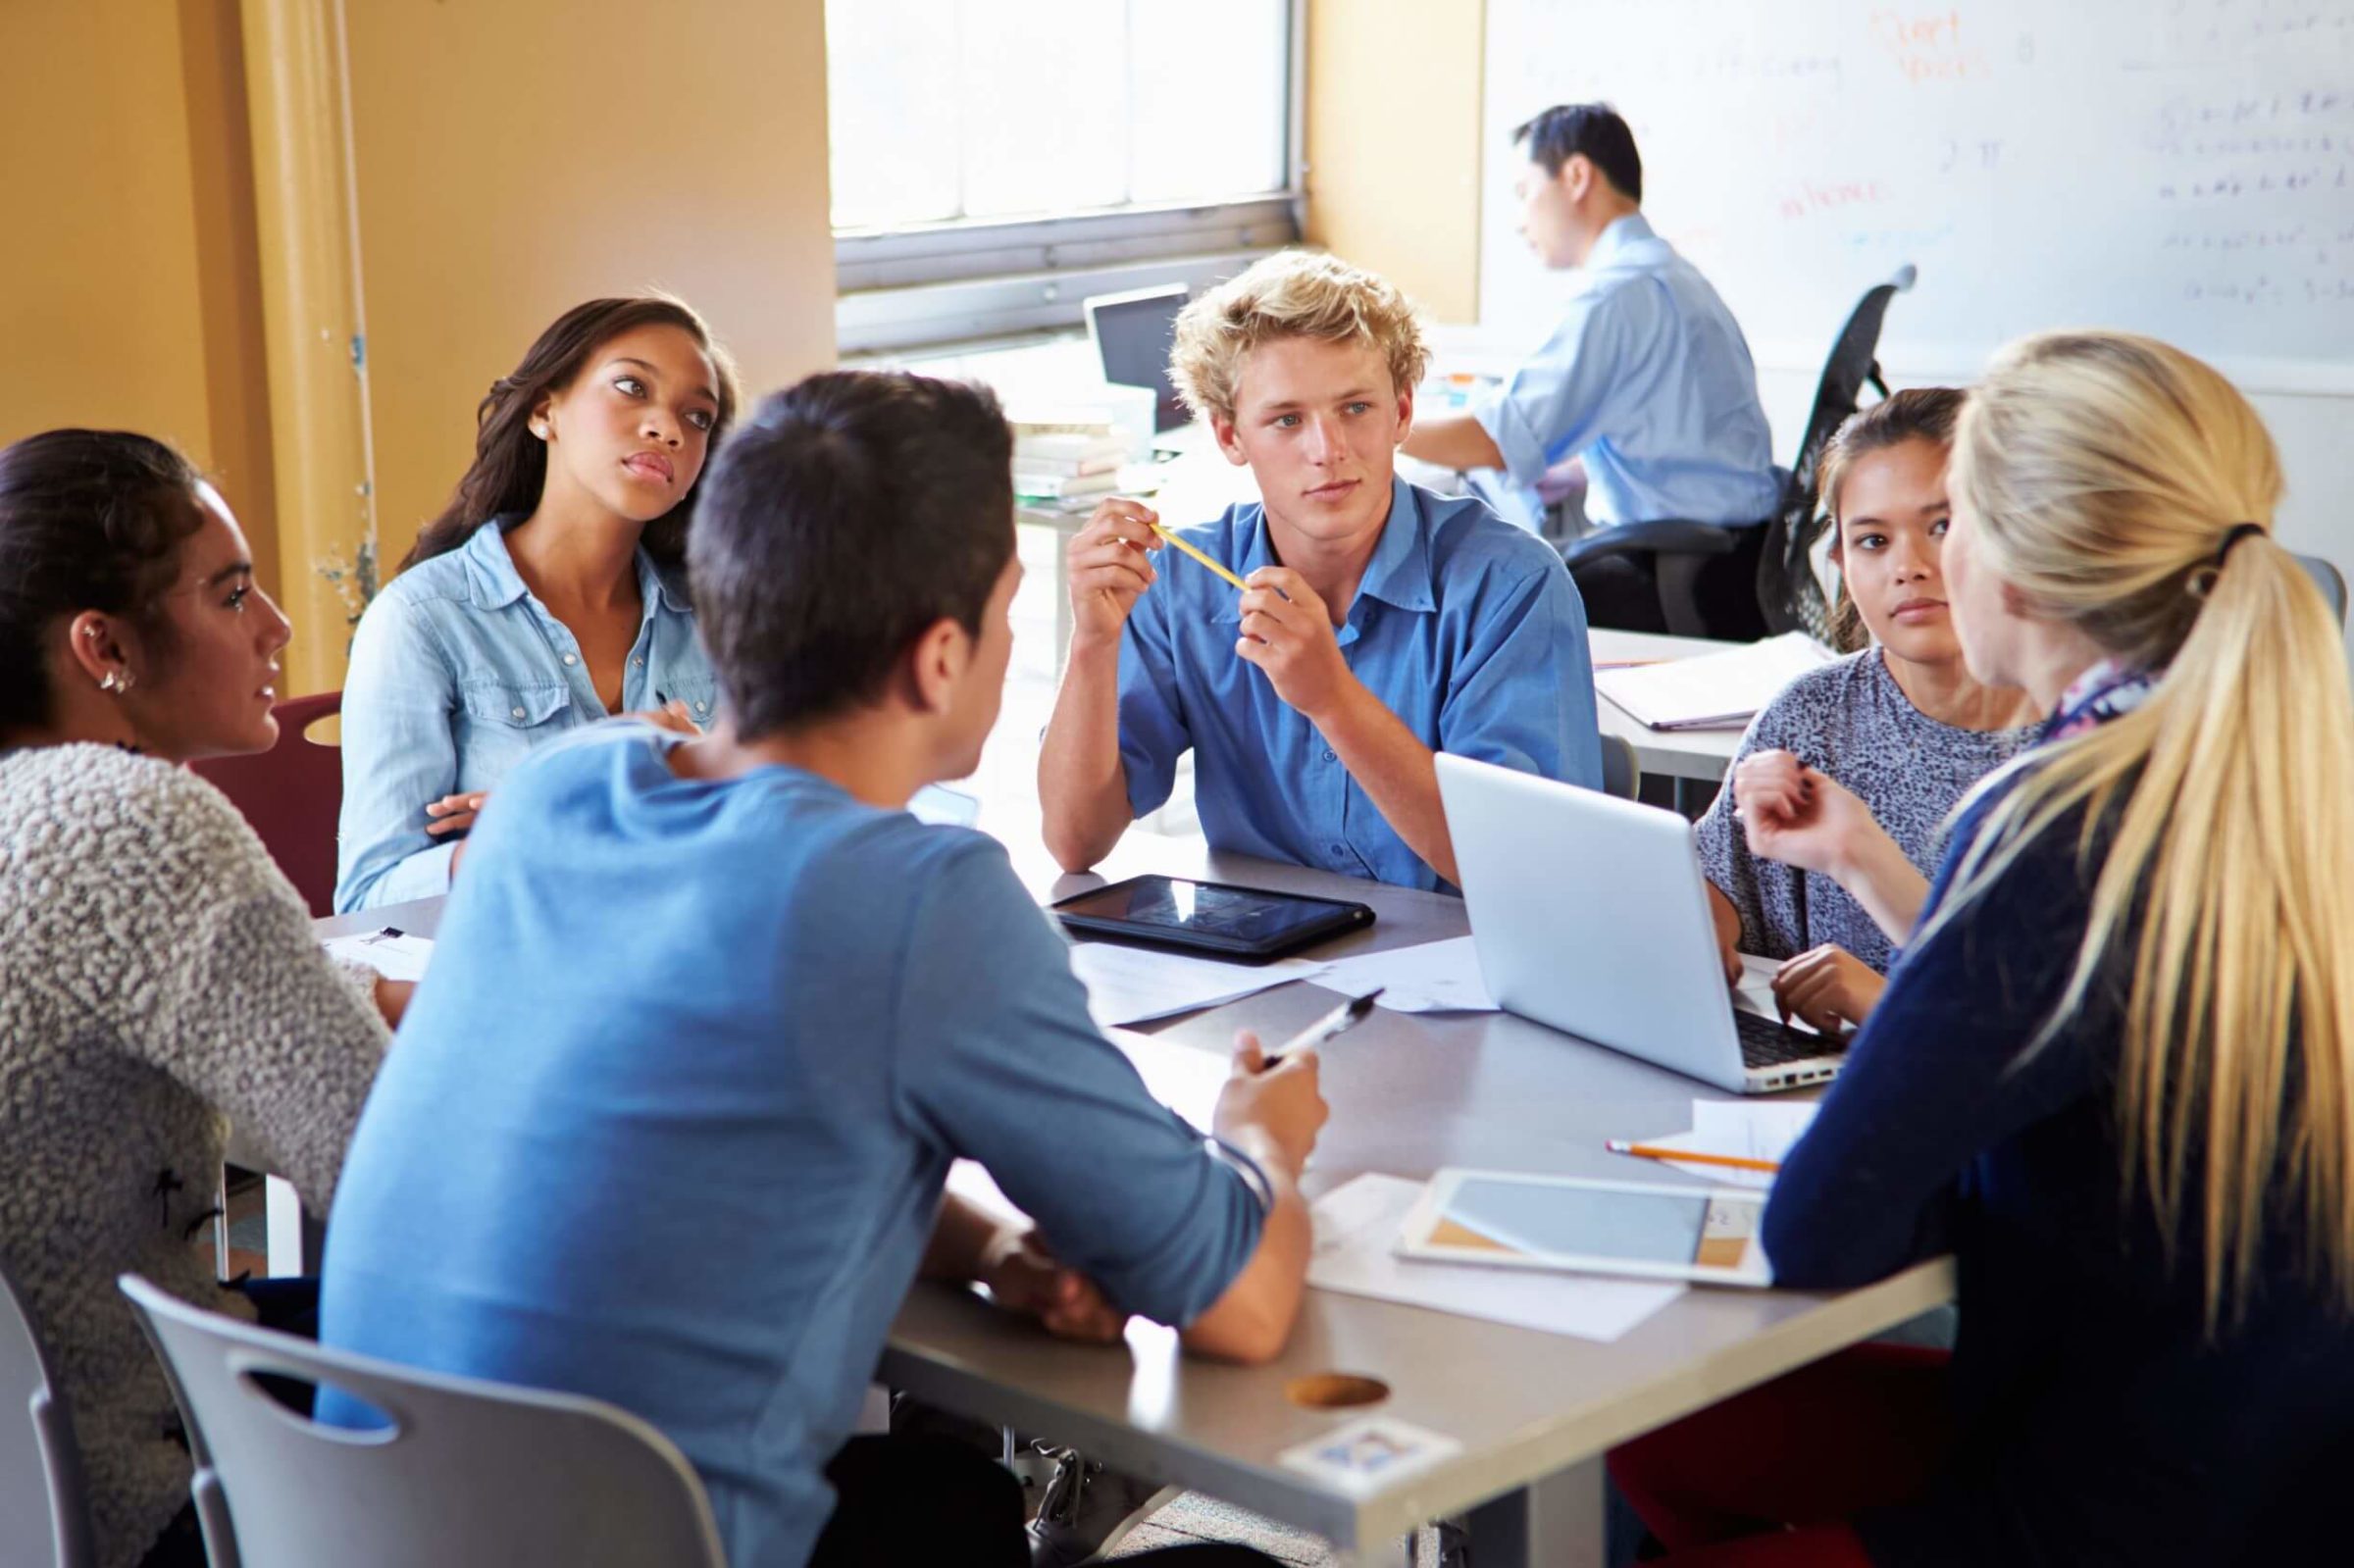 Benefits Of Group Discussions In The Classroom